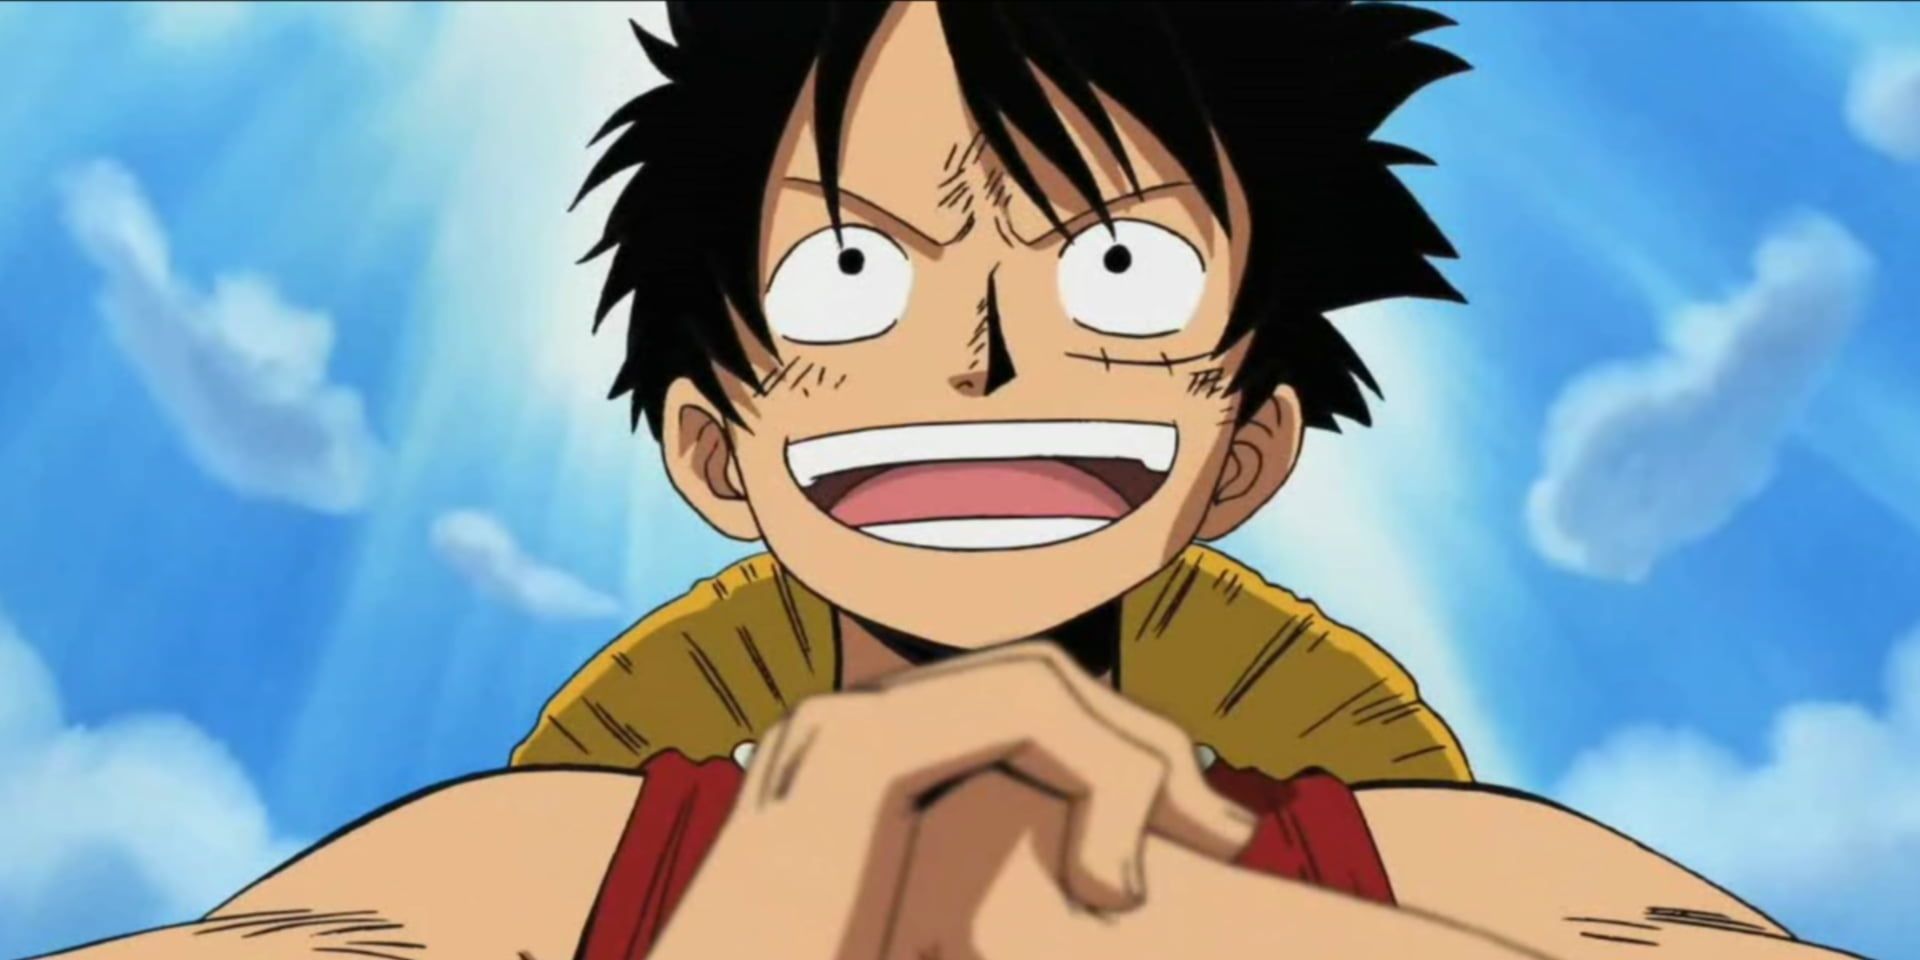 Luffy cracking his knuckles